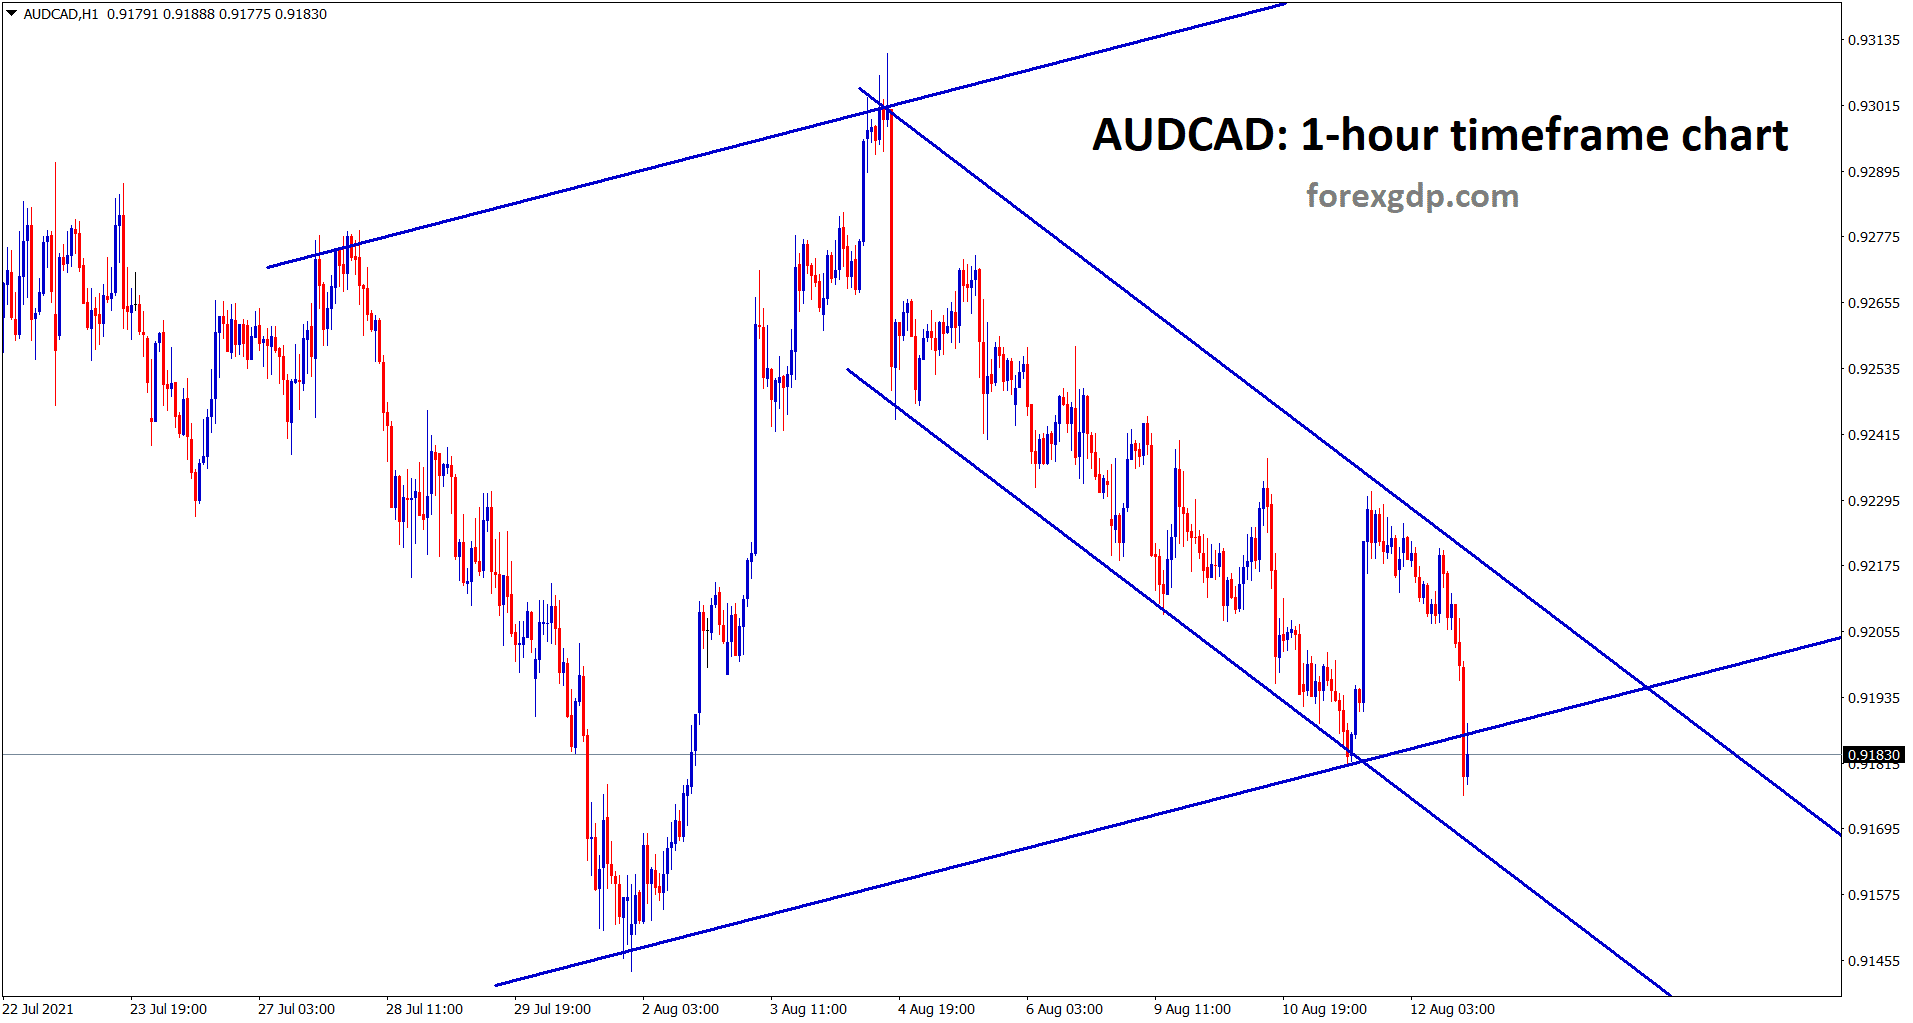 AUDCAD is falling down continously in a descending channel